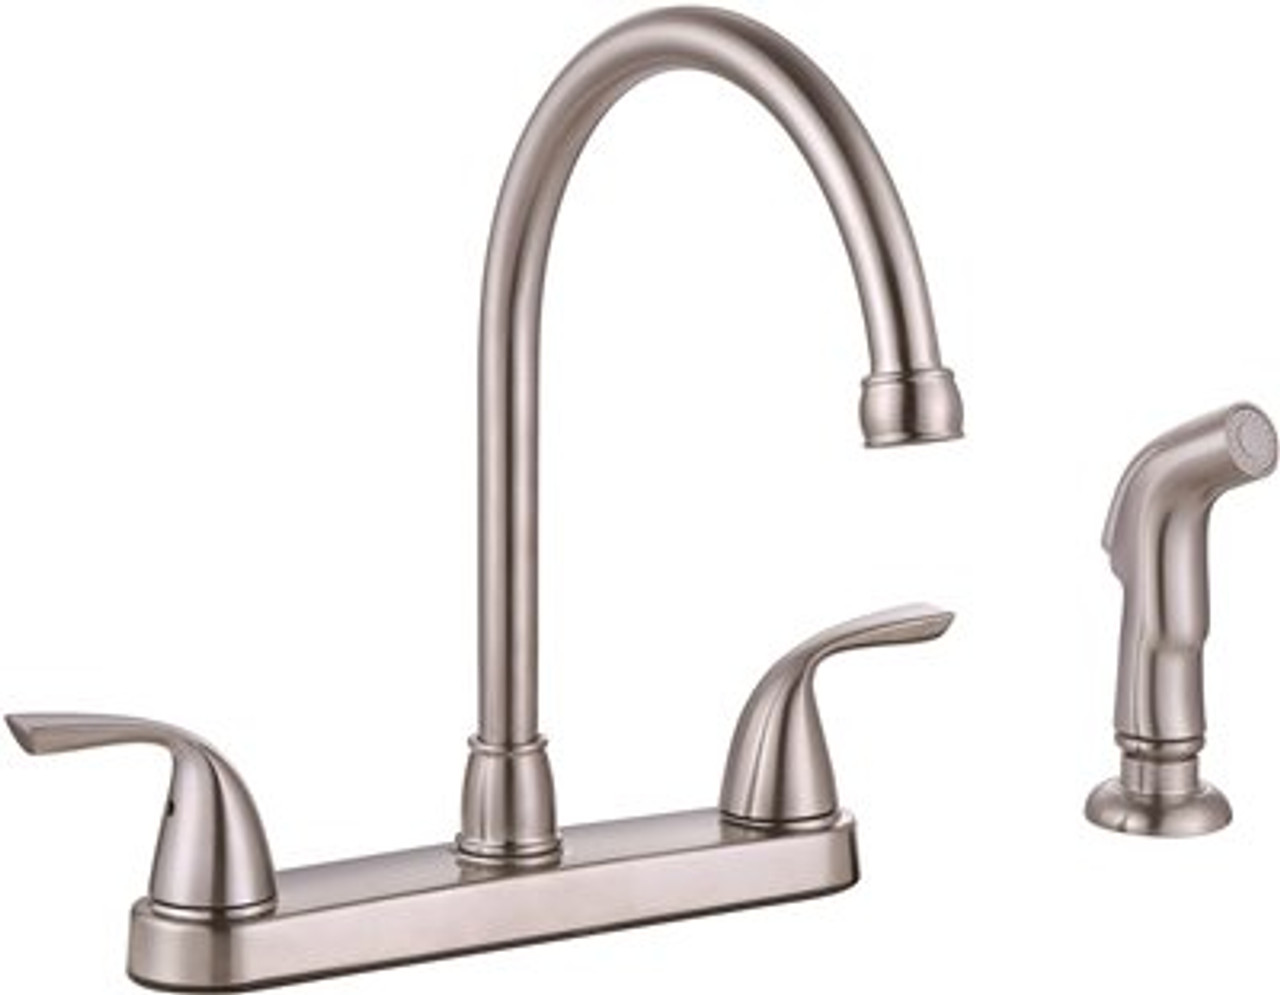 3552605 PREMIER® SANIBEL™ TWO-HANDLE KITCHEN FAUCET WITH SIDE SPRAY, BRUSHED  NICKEL Express Kitchens